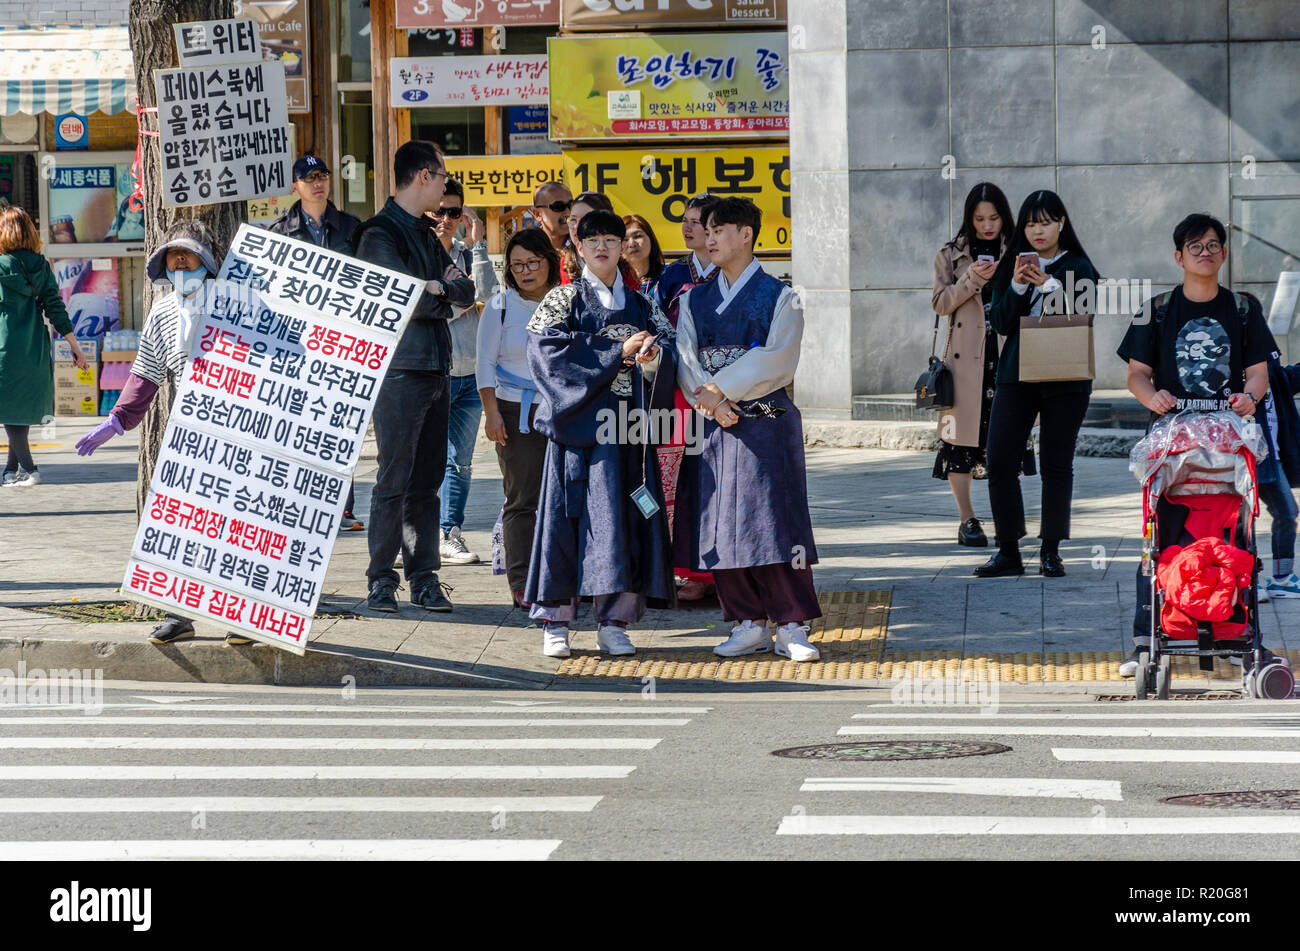 A person with placards stages a one man protest as tourists dressed in traditional Korean attire wait to cross the road at a pedestrian crossing. Stock Photo